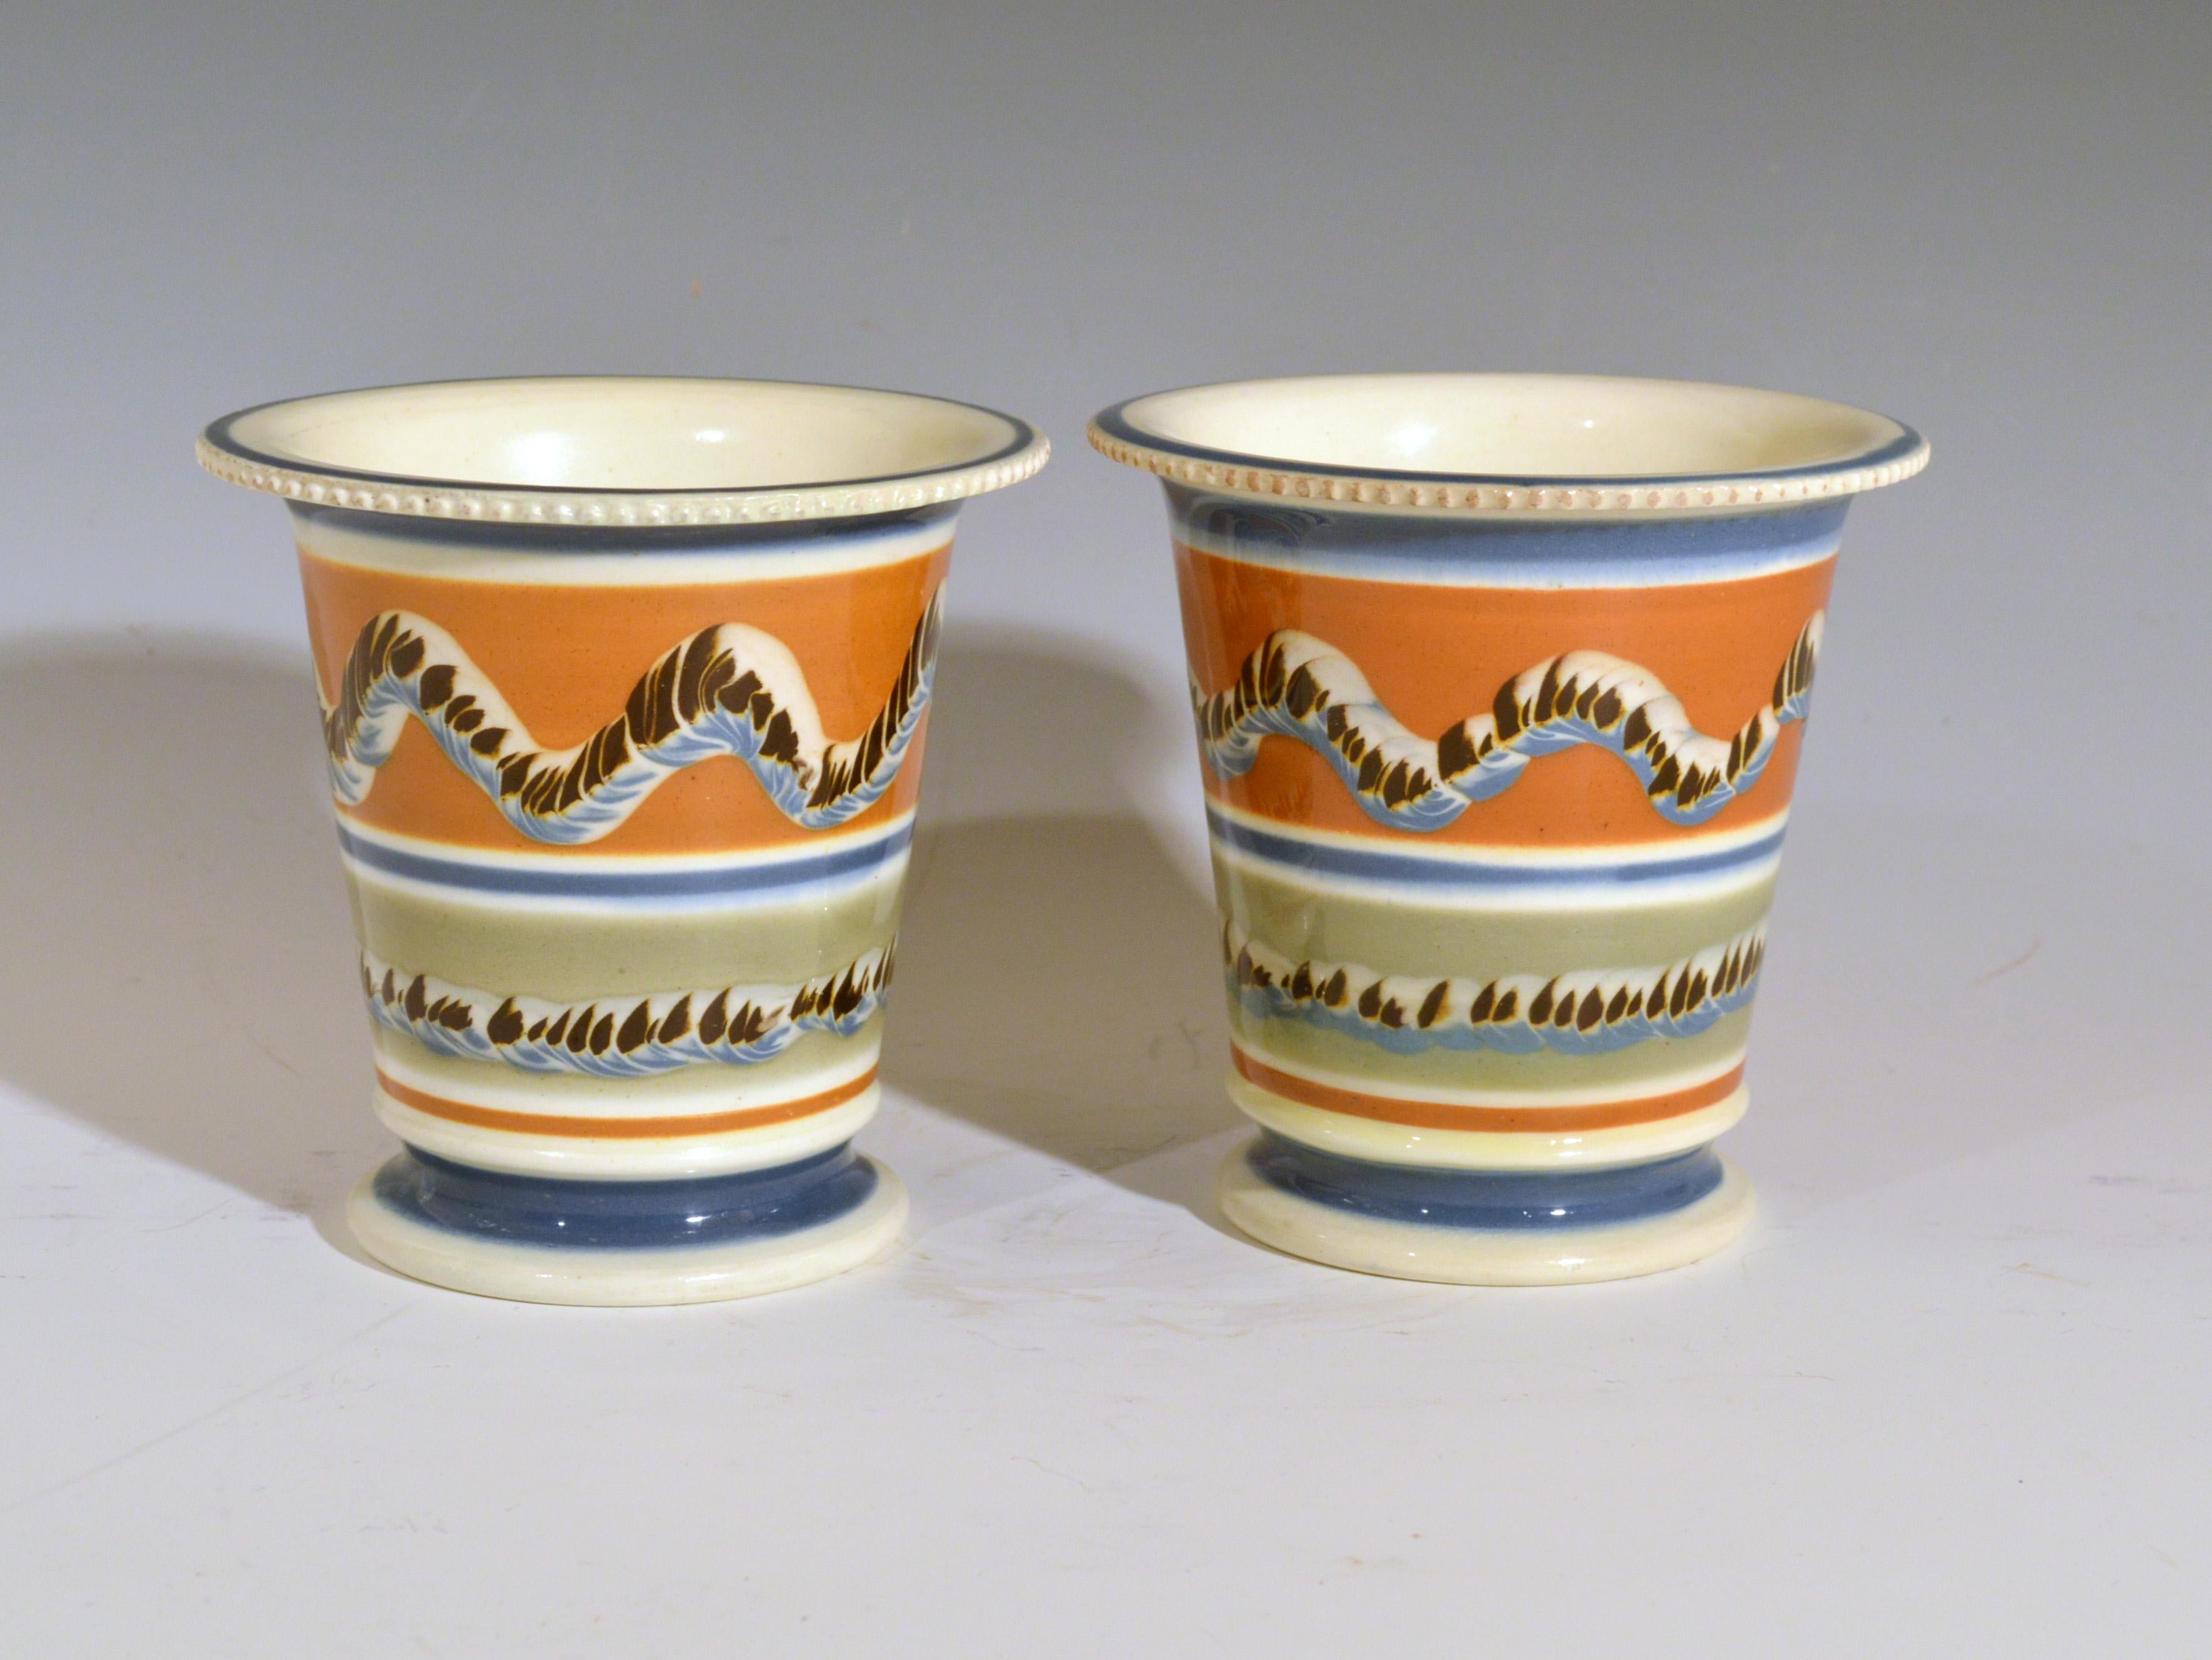 19th Century Mocha Creamware Pottery Pair of Cachepots with Earthworm Design